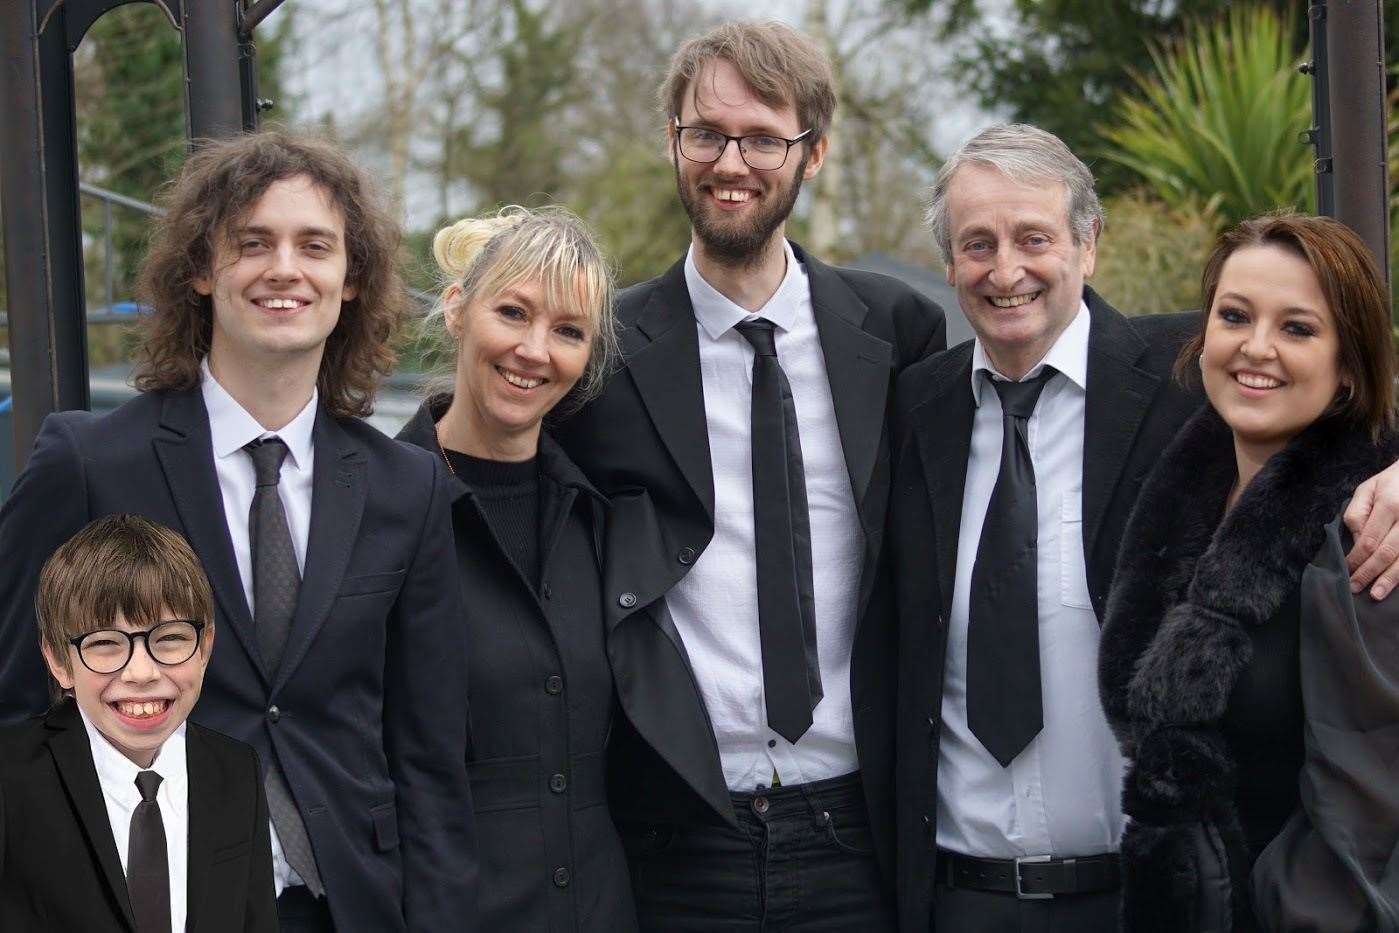 The Hedges family, from left to right: Tyler, Harrison, Nicola, Jackson, Cleve and Lavinia